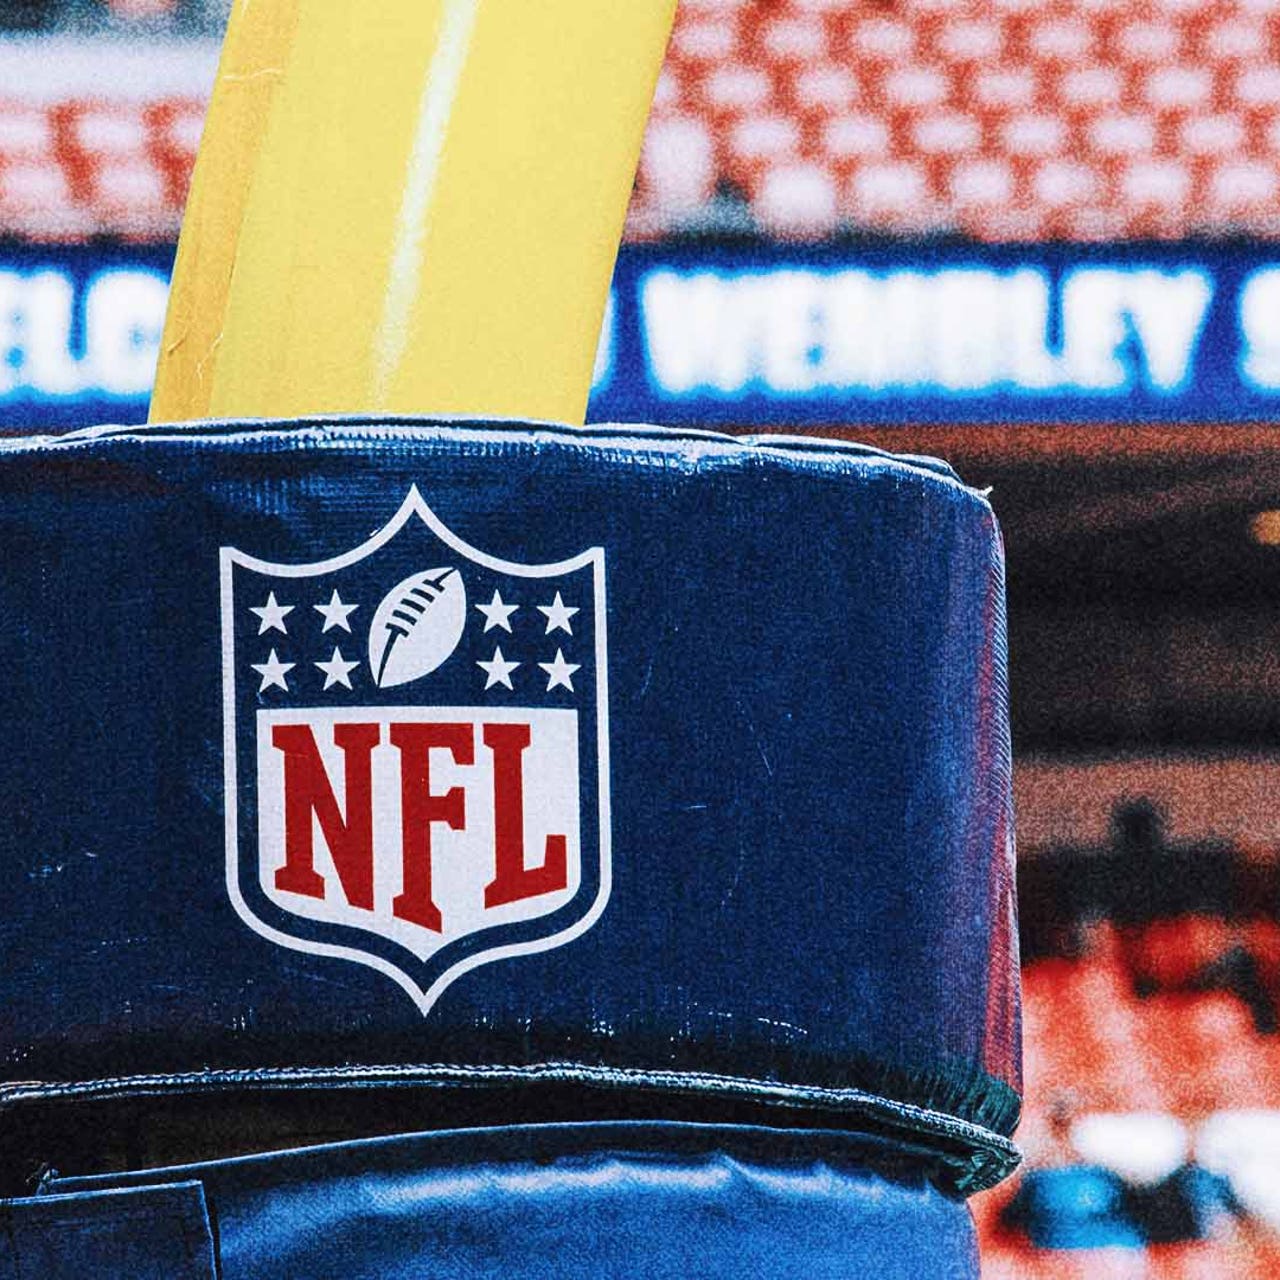 NFL Announces Two 2023 International Games in Germany